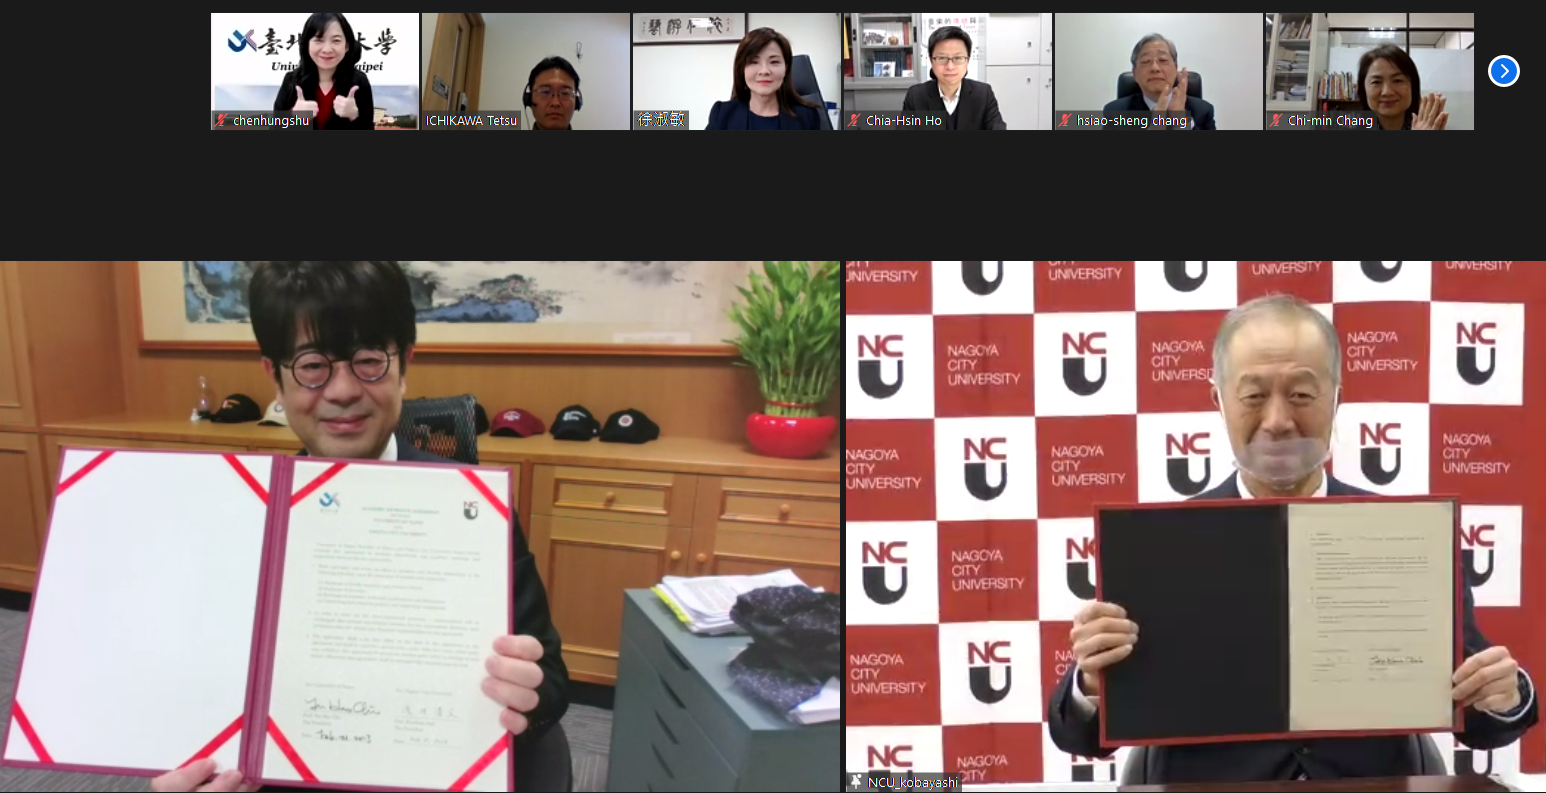 Signing the agreement. Dr. Yin-Hao Chiu, president of UT(Left) and Dr. Kiyofumi Asai, president of NCU(Right)